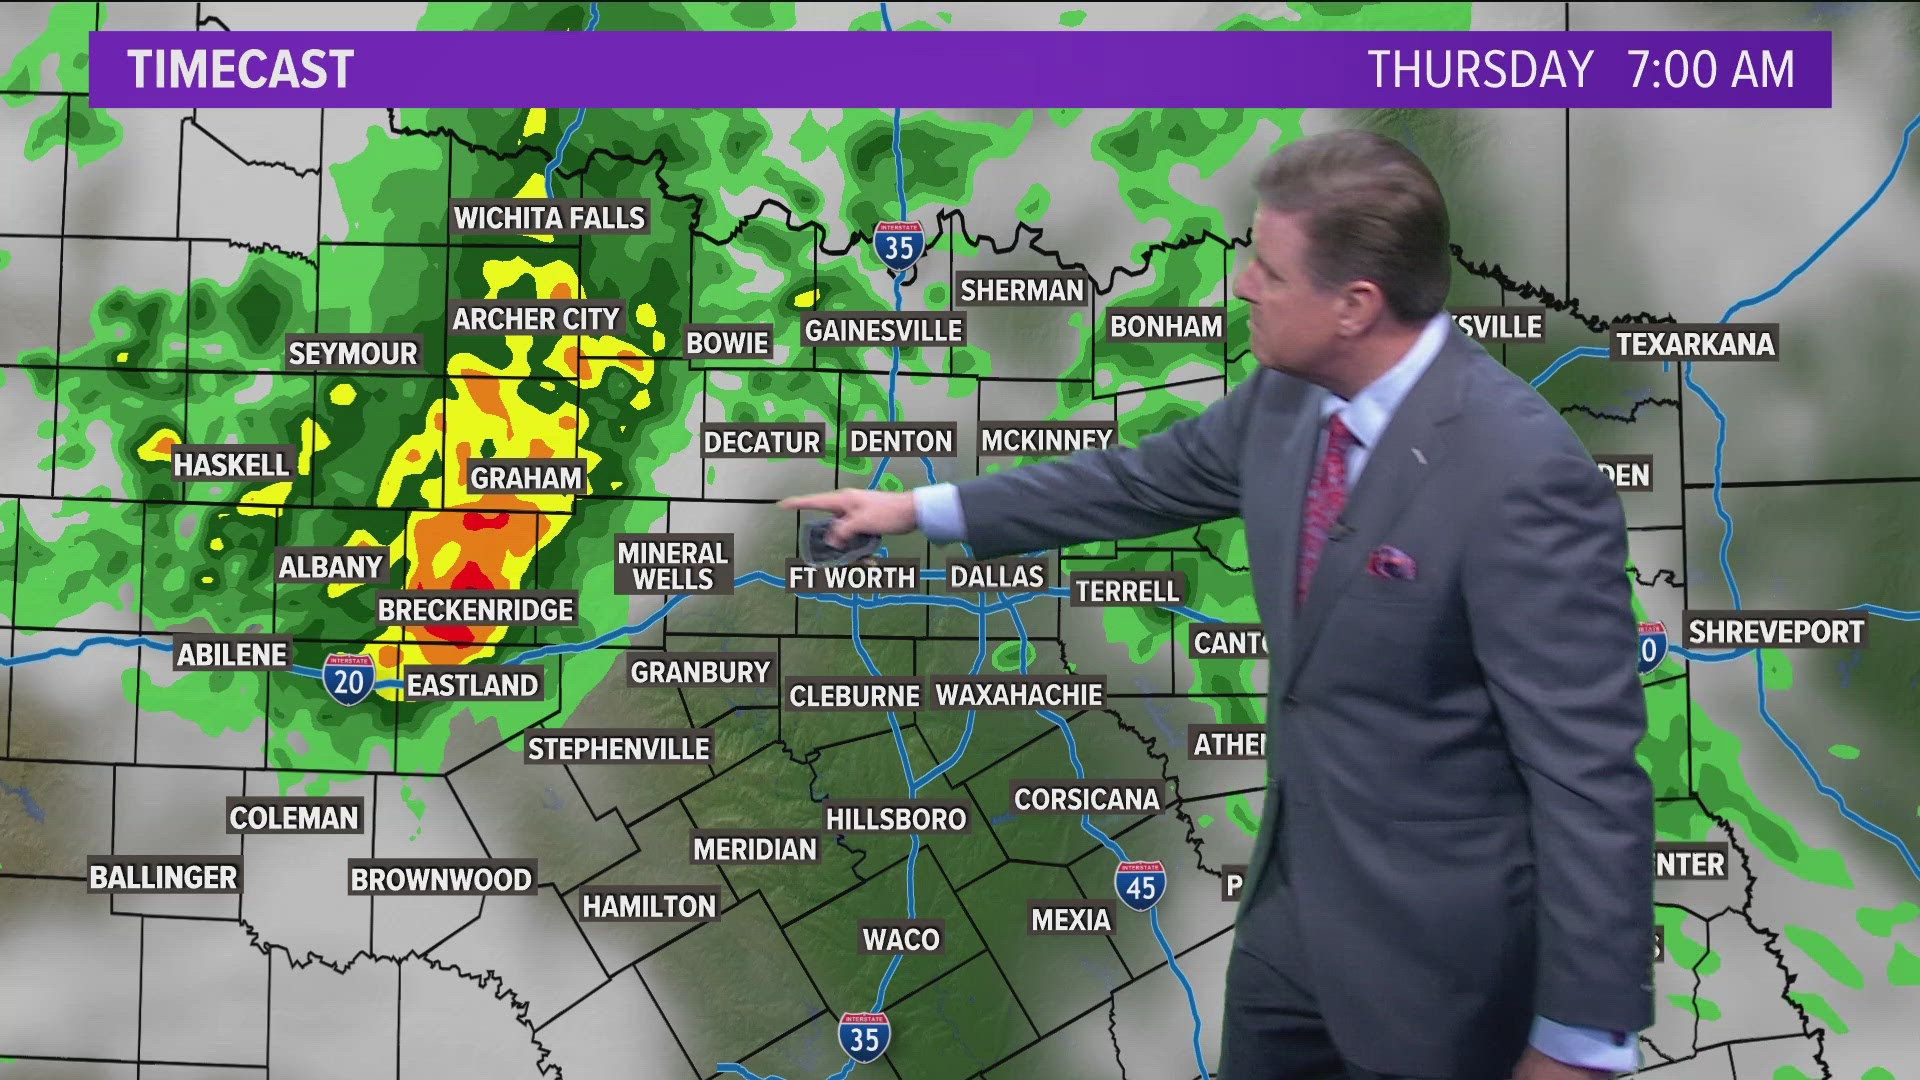 Widespread rain is expected in North Texas tomorrow.